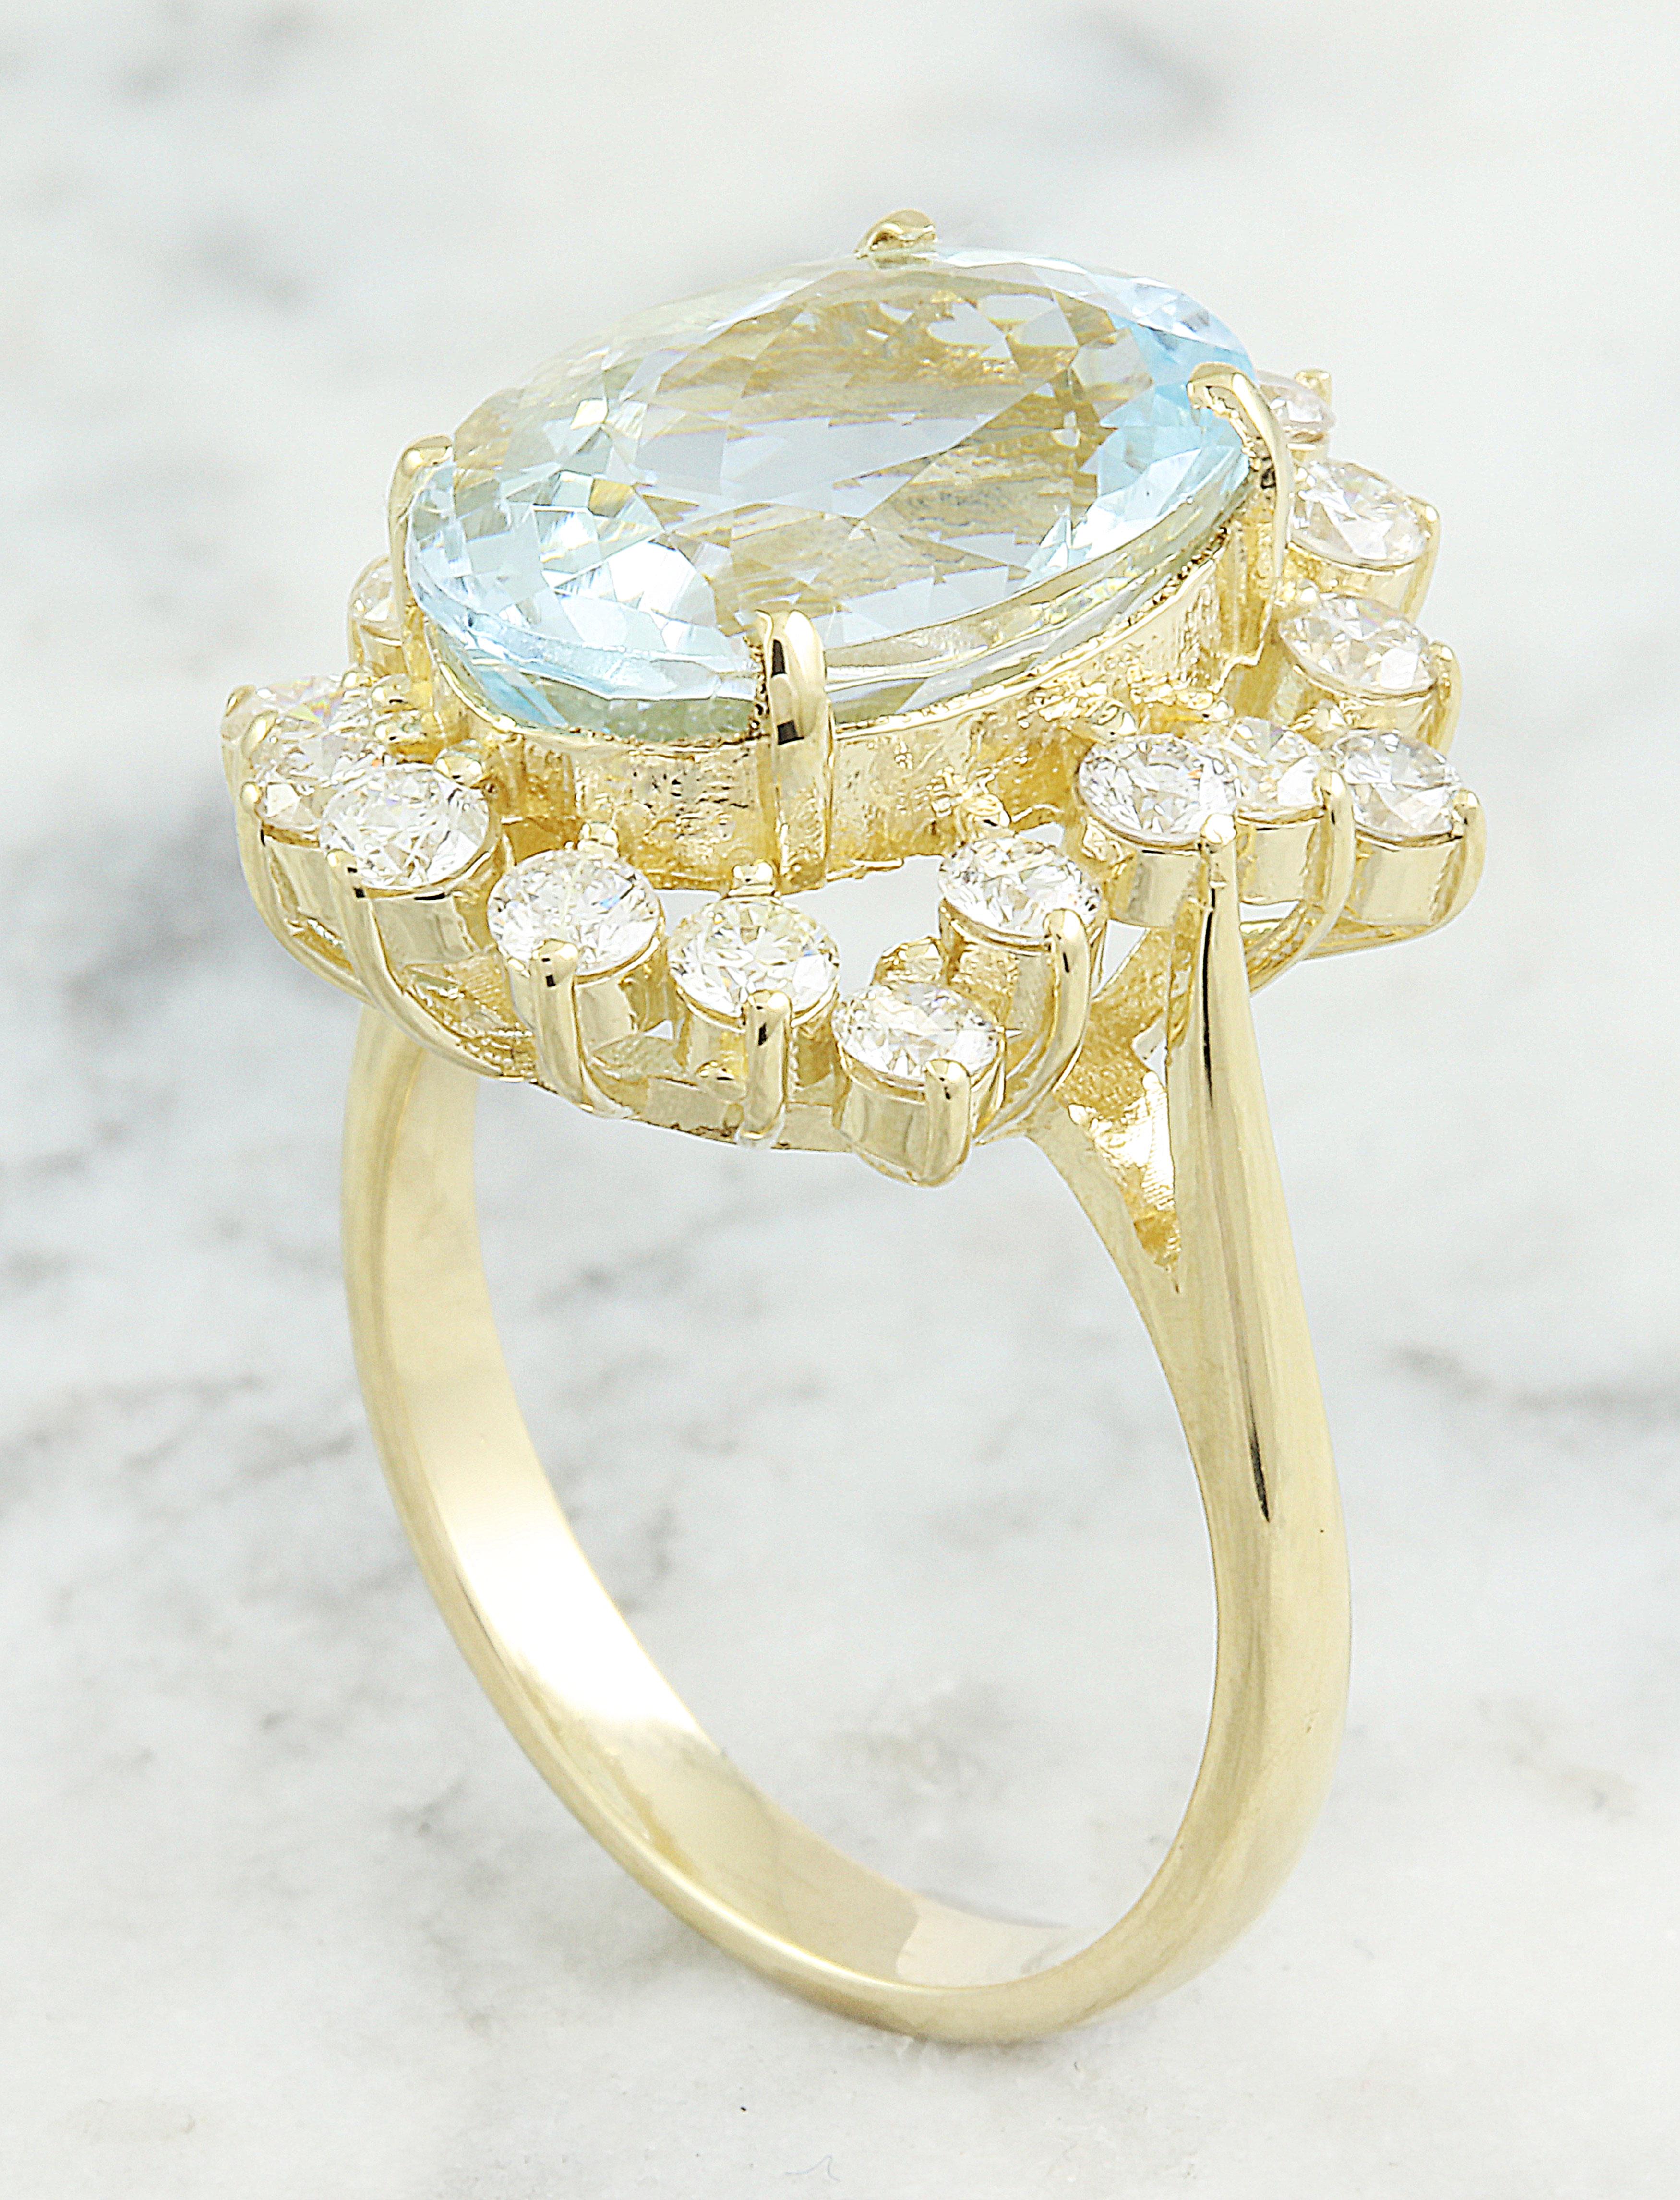 Oval Cut Dazzling Natural Aquamarine Diamond Ring In 14 Karat Yellow Gold  For Sale